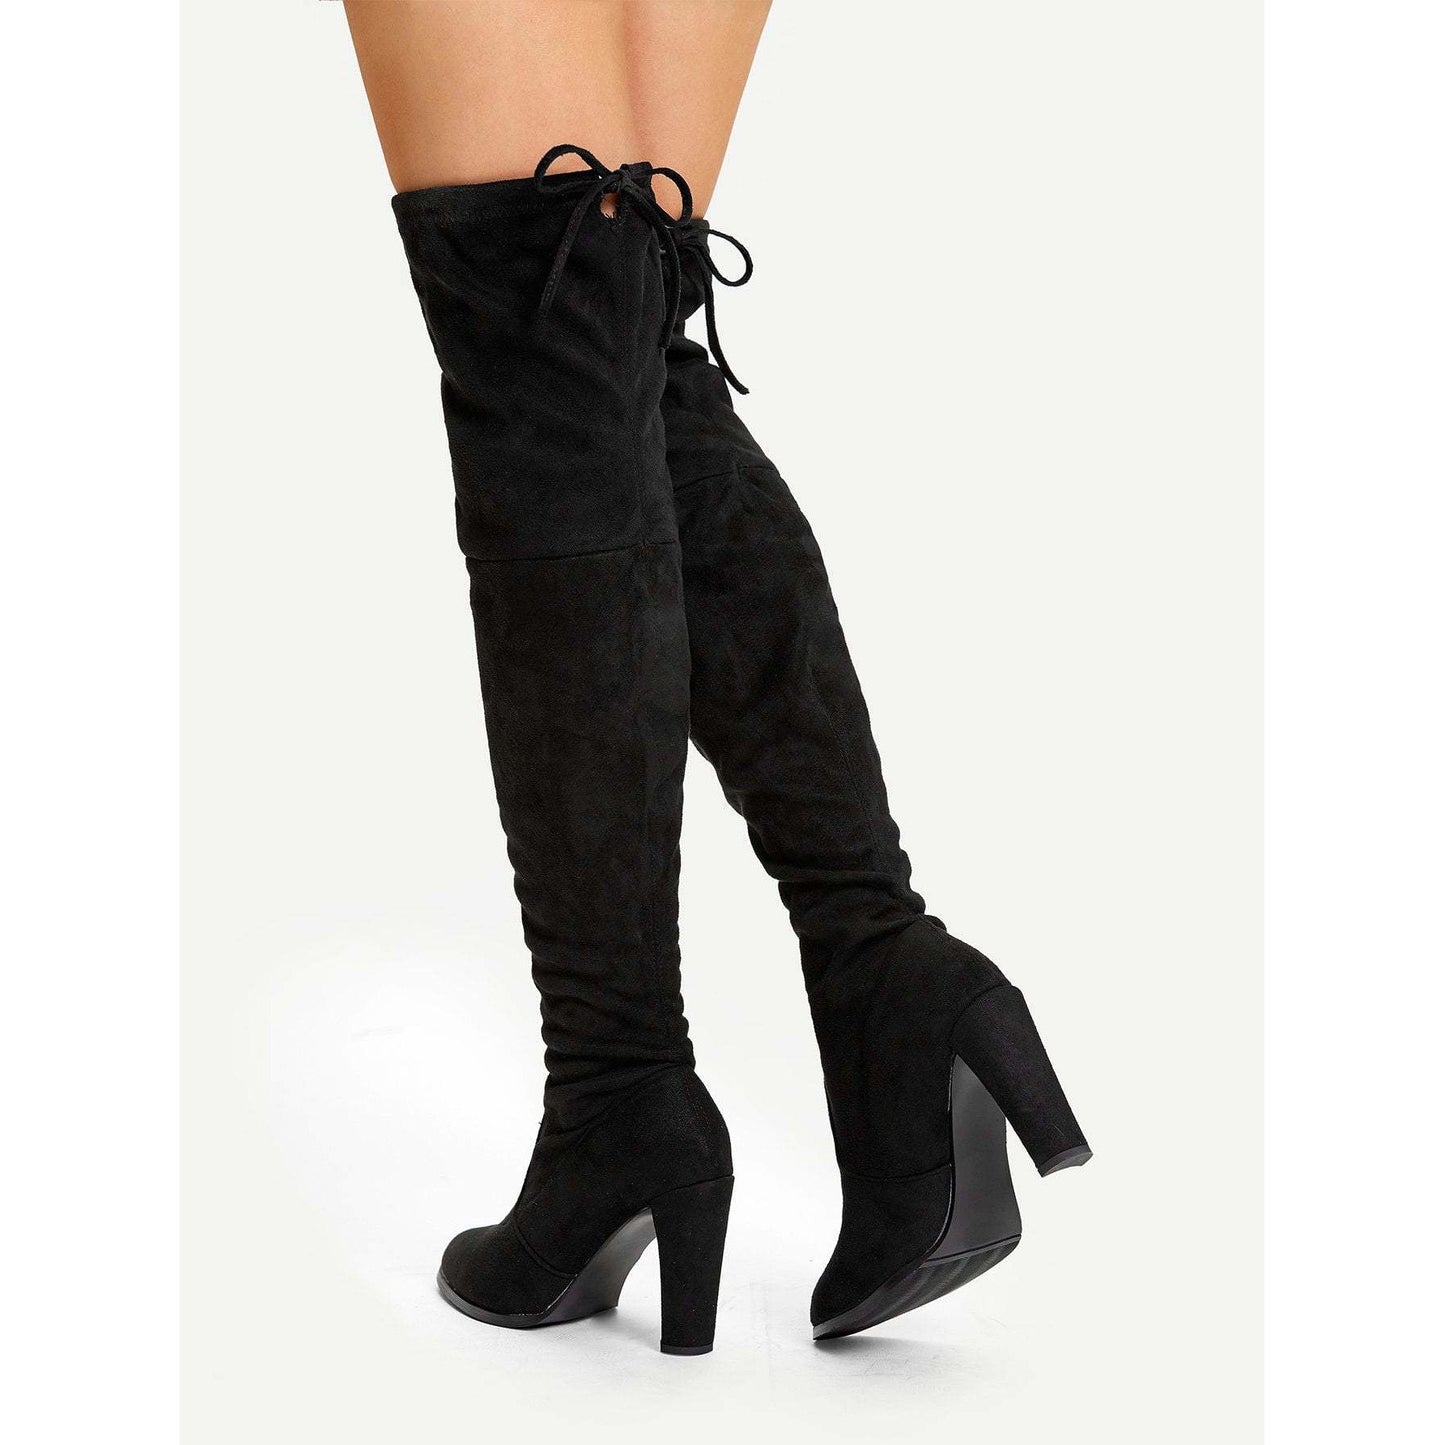 Suede Over The Knee Plain Boots